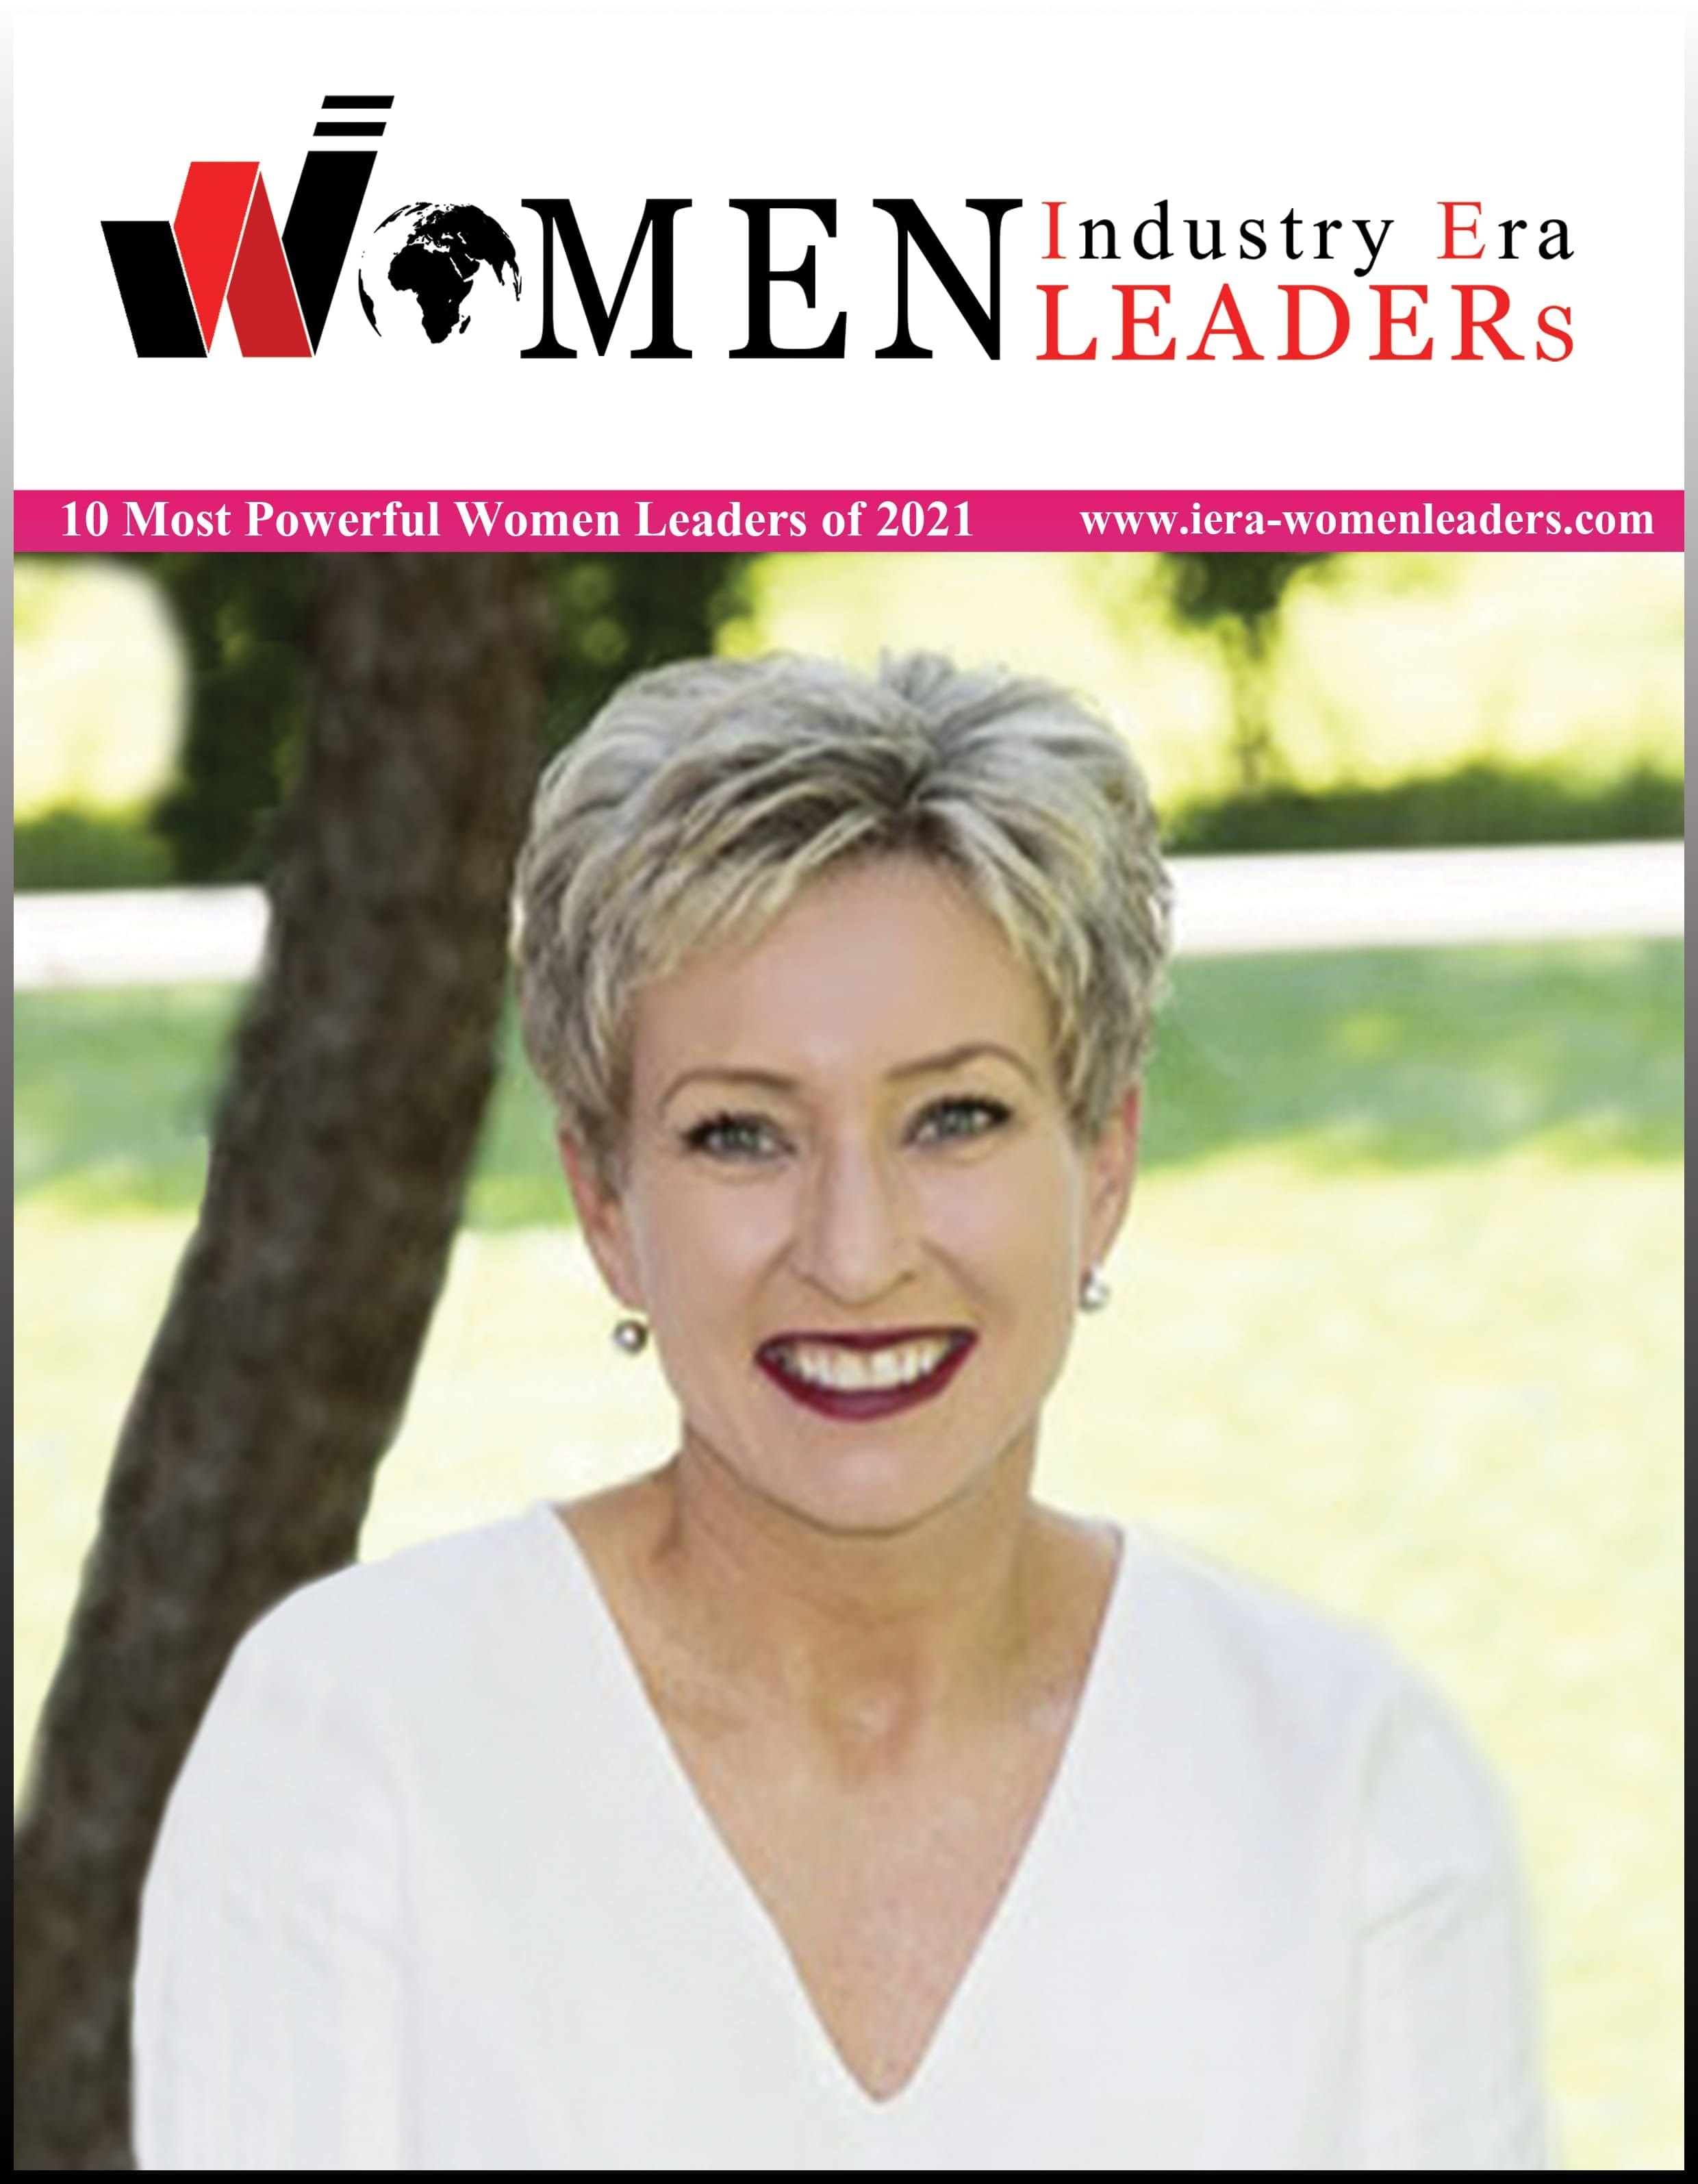 10 Most Powerful Women Leaders of 2021 Magazine